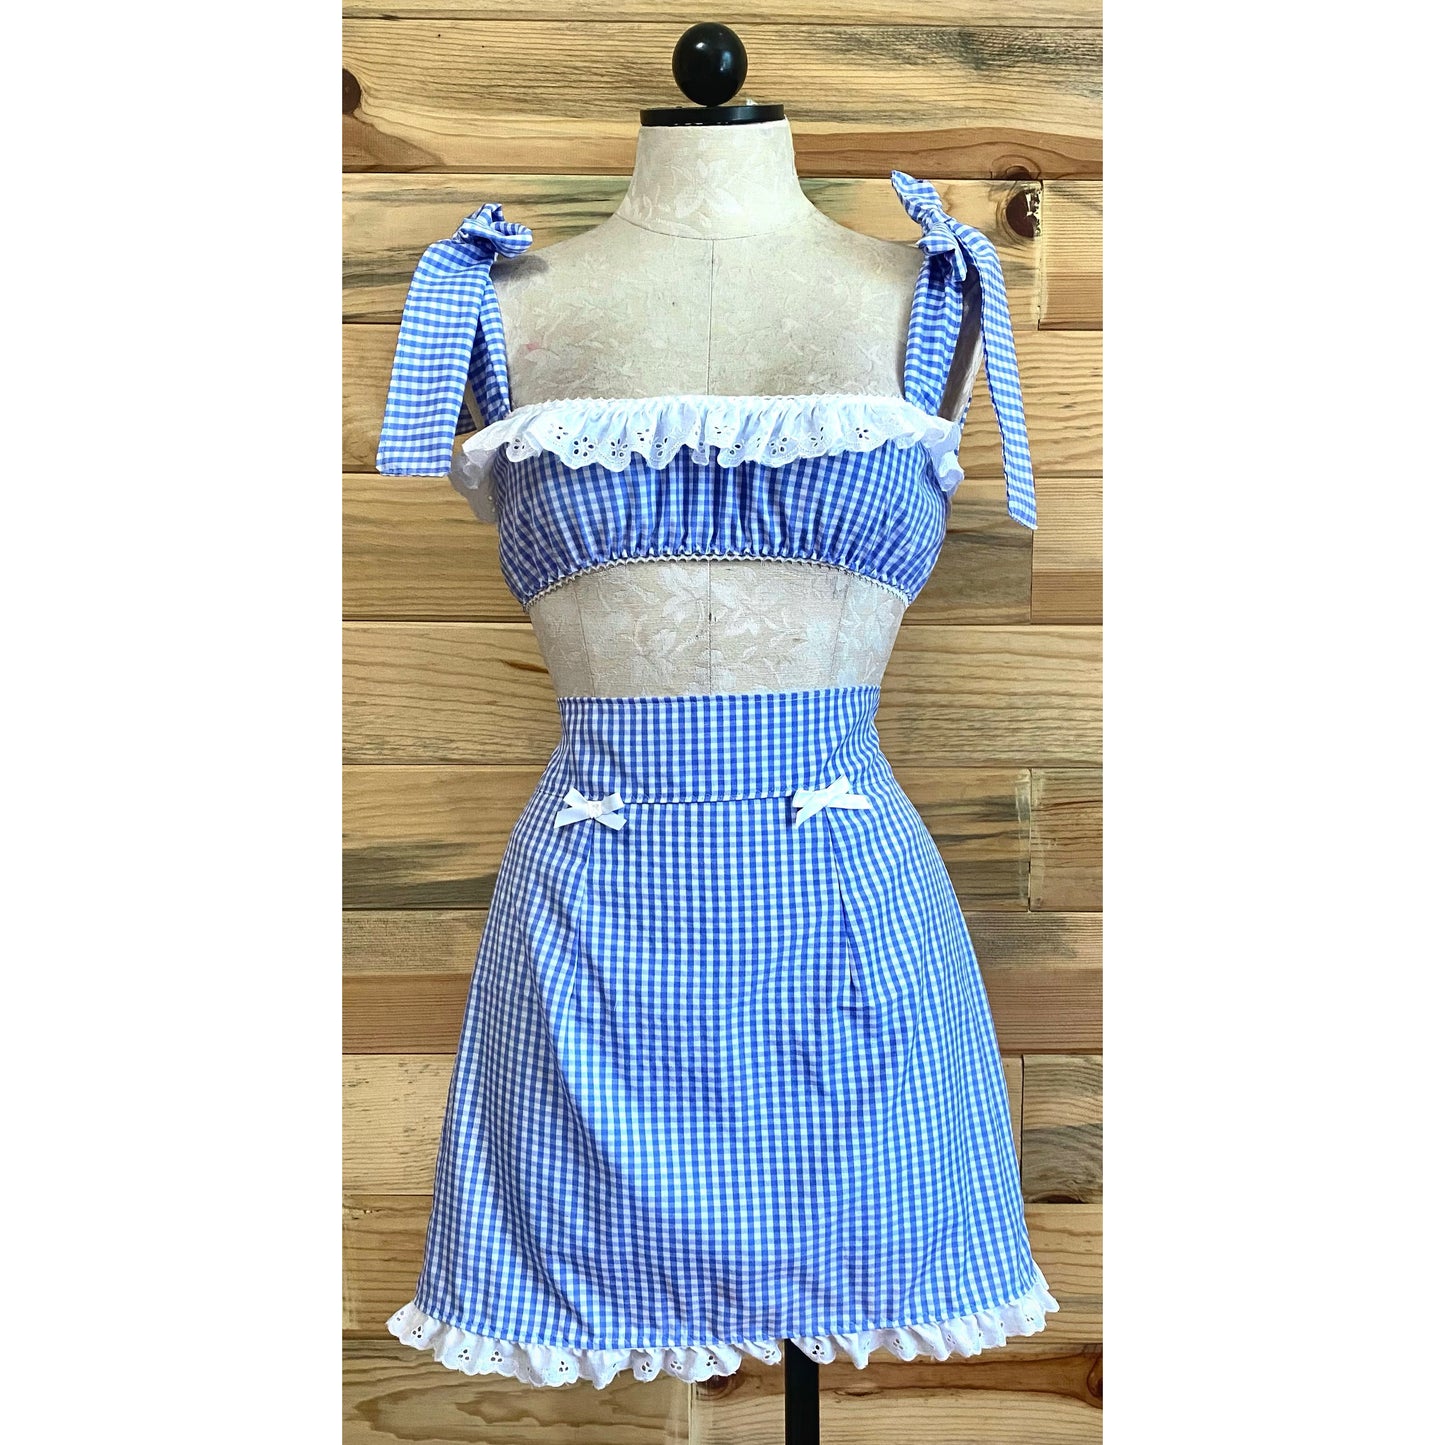 The Addy Set in Blue Gingham